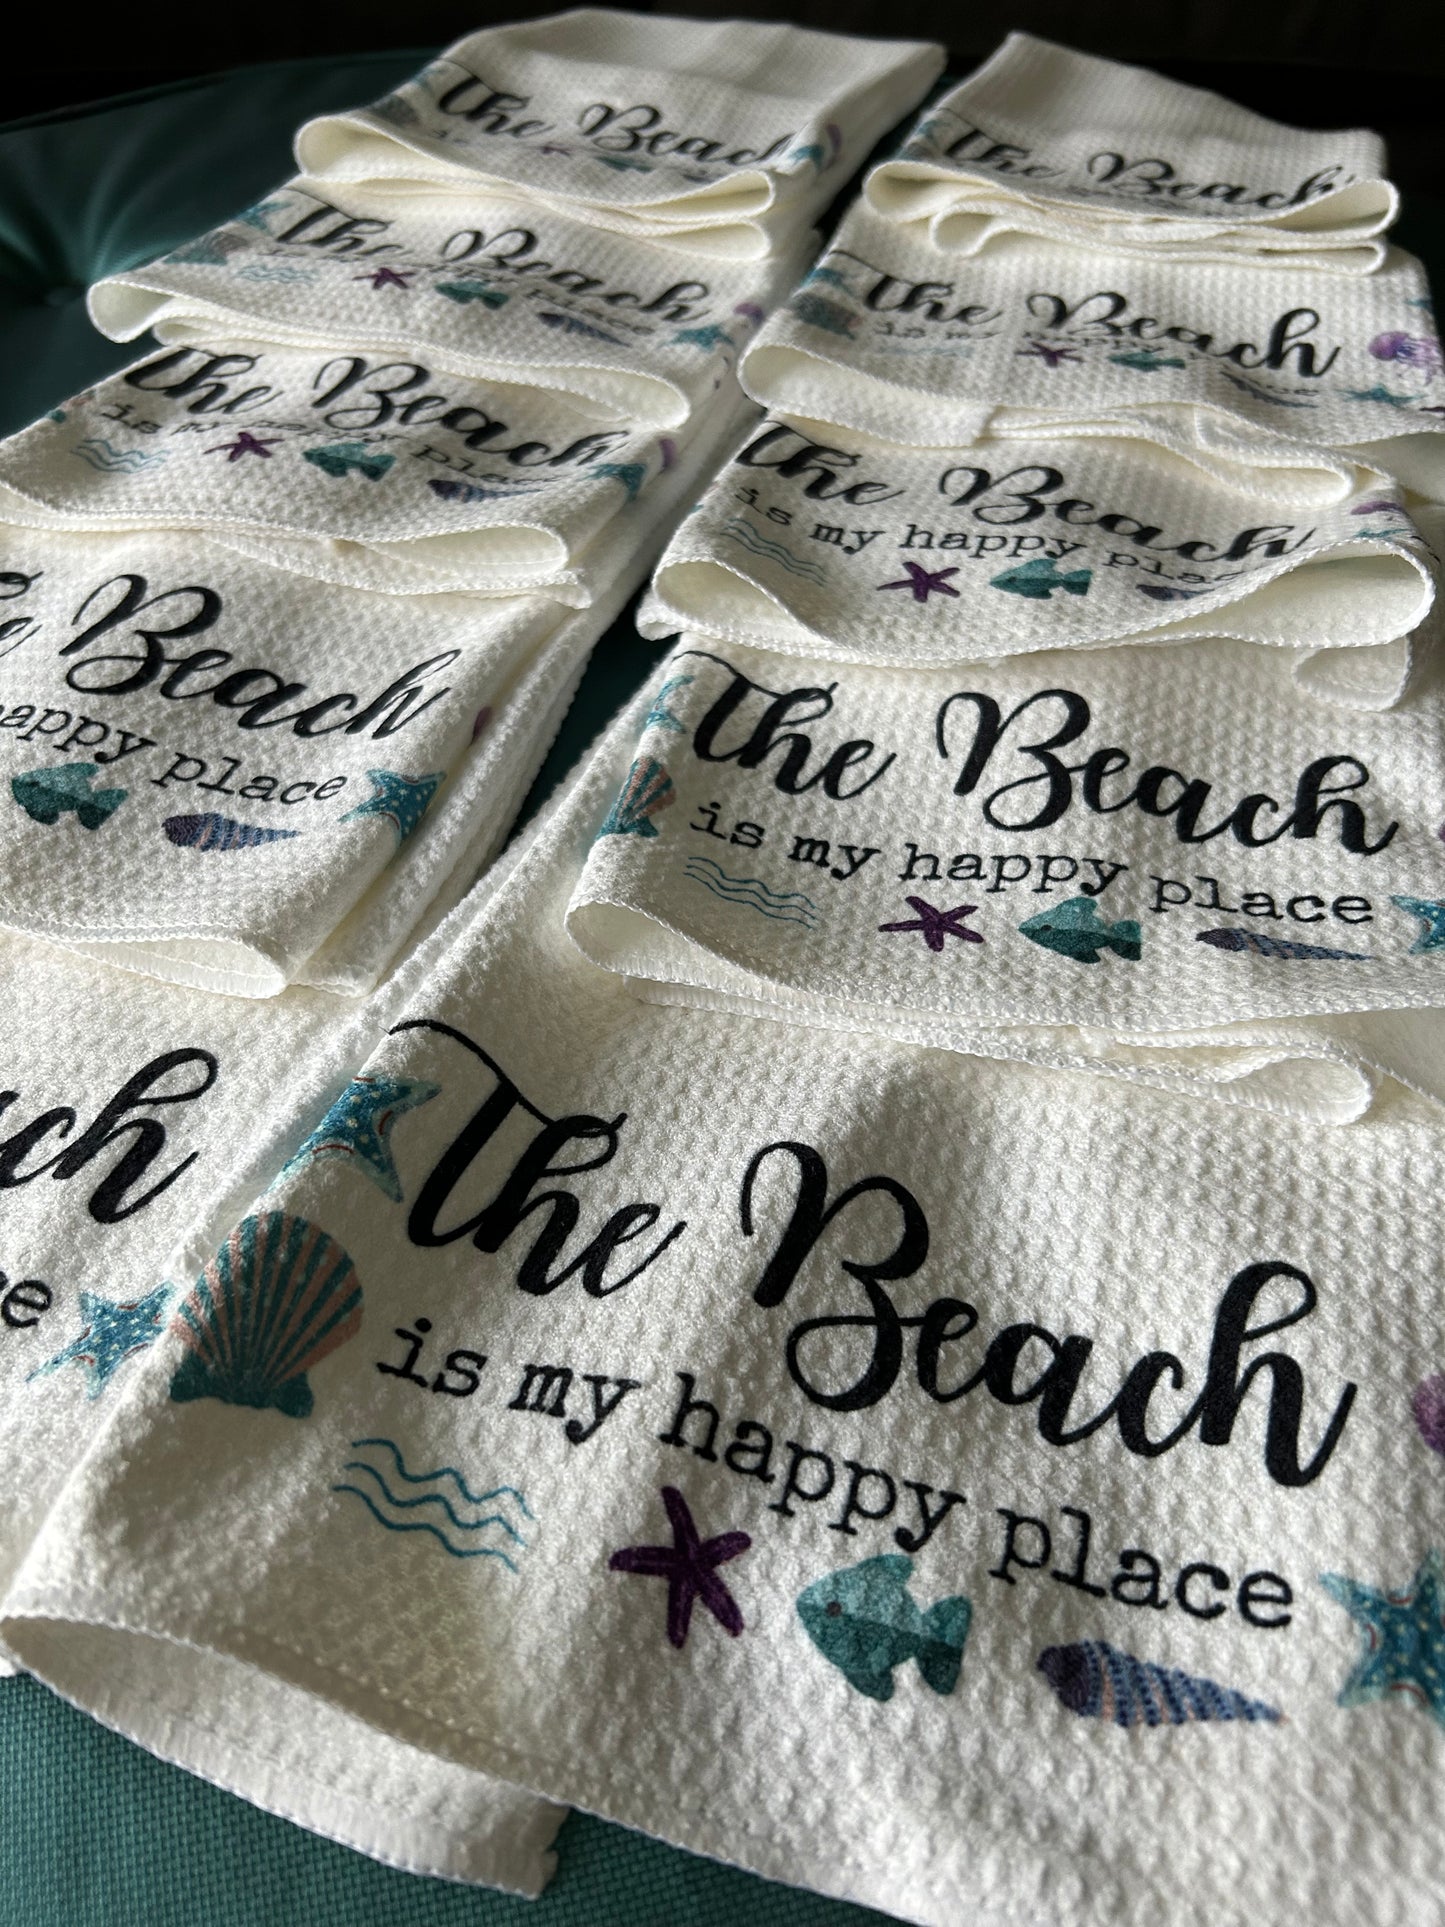 PDX Flower Power "The Beach is my happy place" waffle weave kitchen towel, Beach themed towel, unique beach towel, Custom beach towels